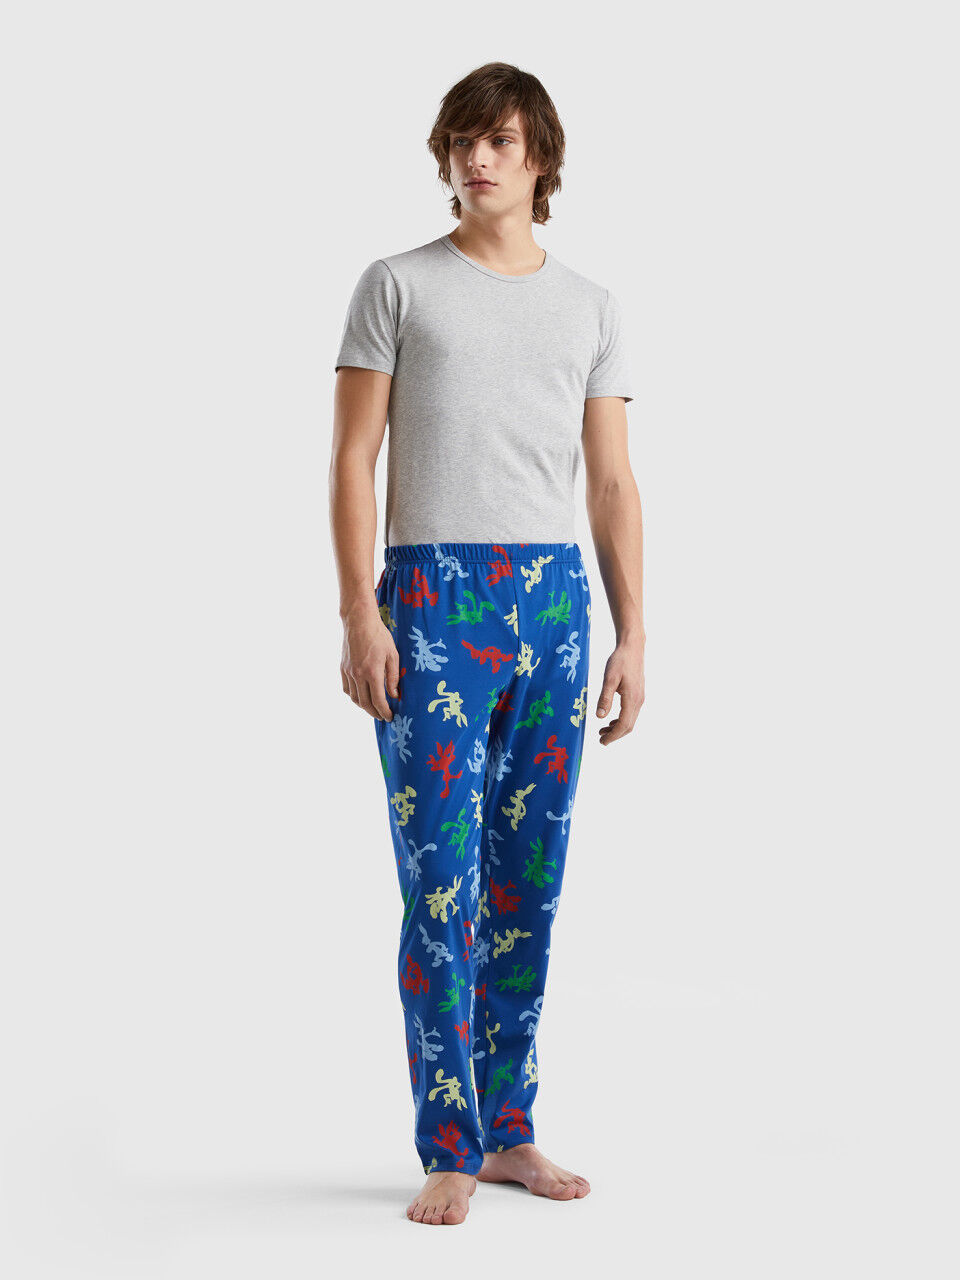 Bugs Bunny trousers